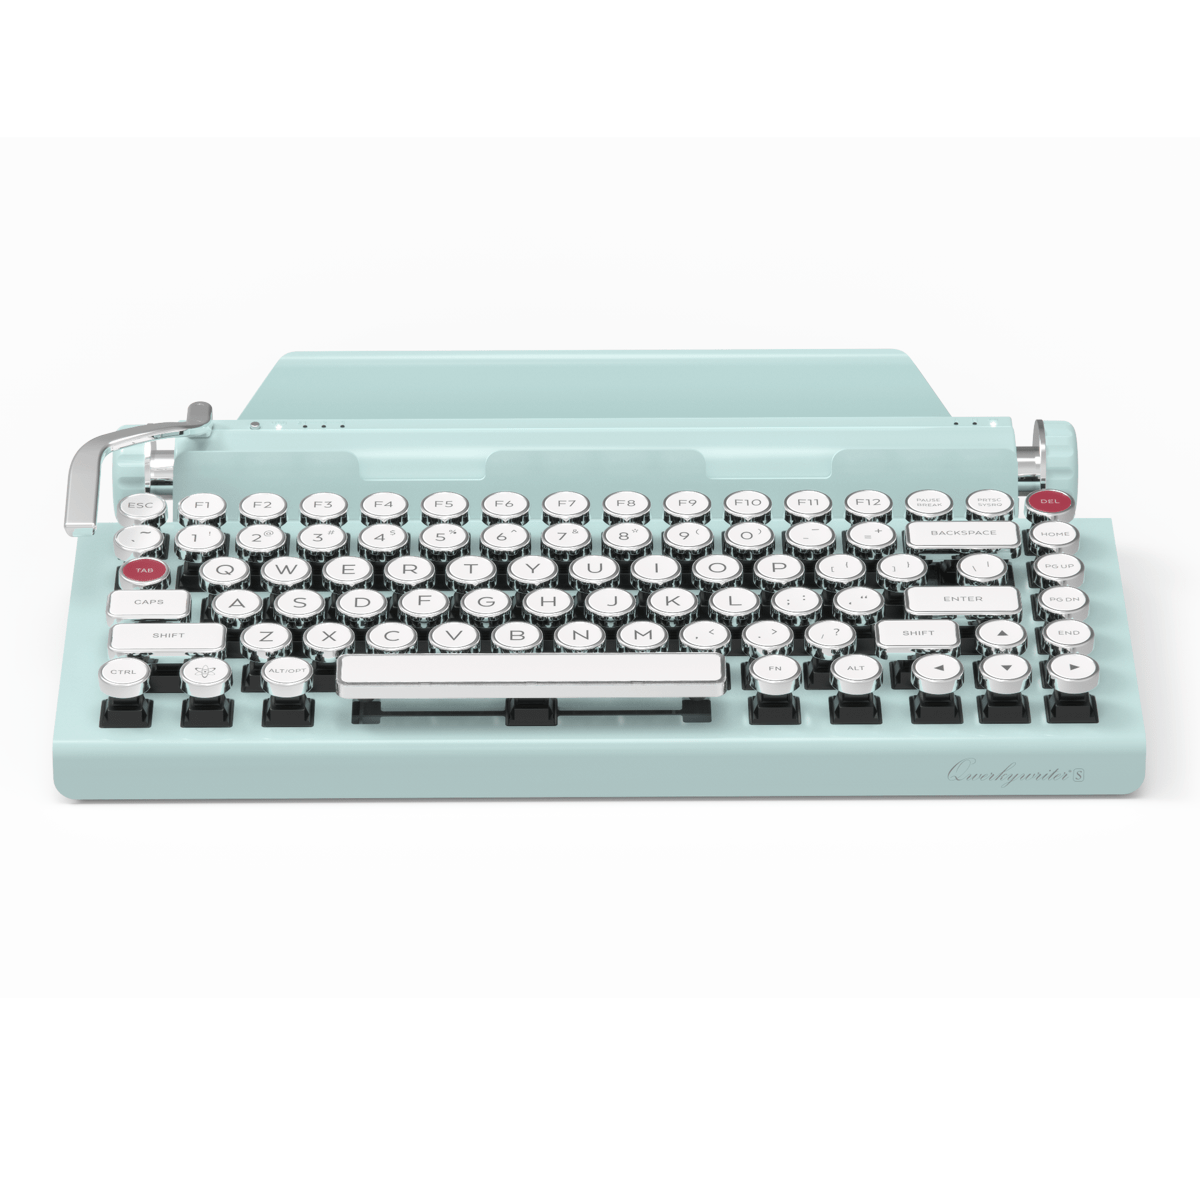 Review: Qwerkywriter S is a timeless approach to mechanical keyboards